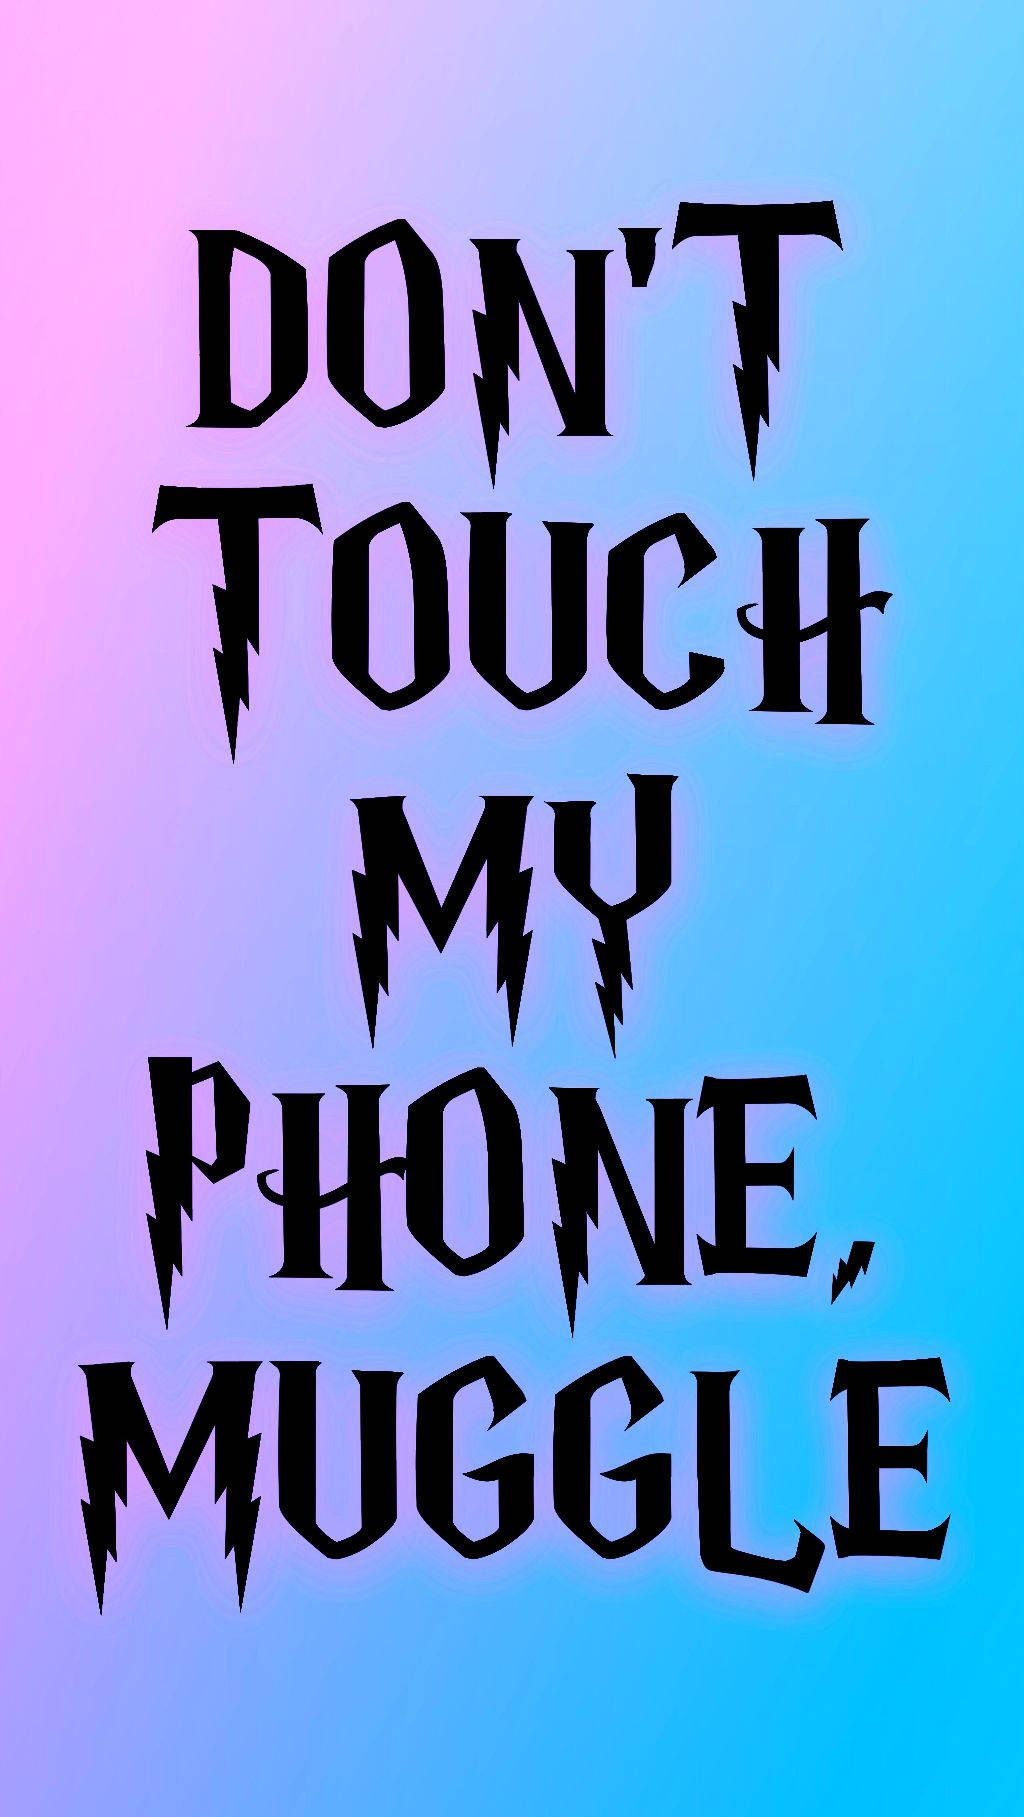 Don't Touch My Phone Muggle Gradient Wallpaper